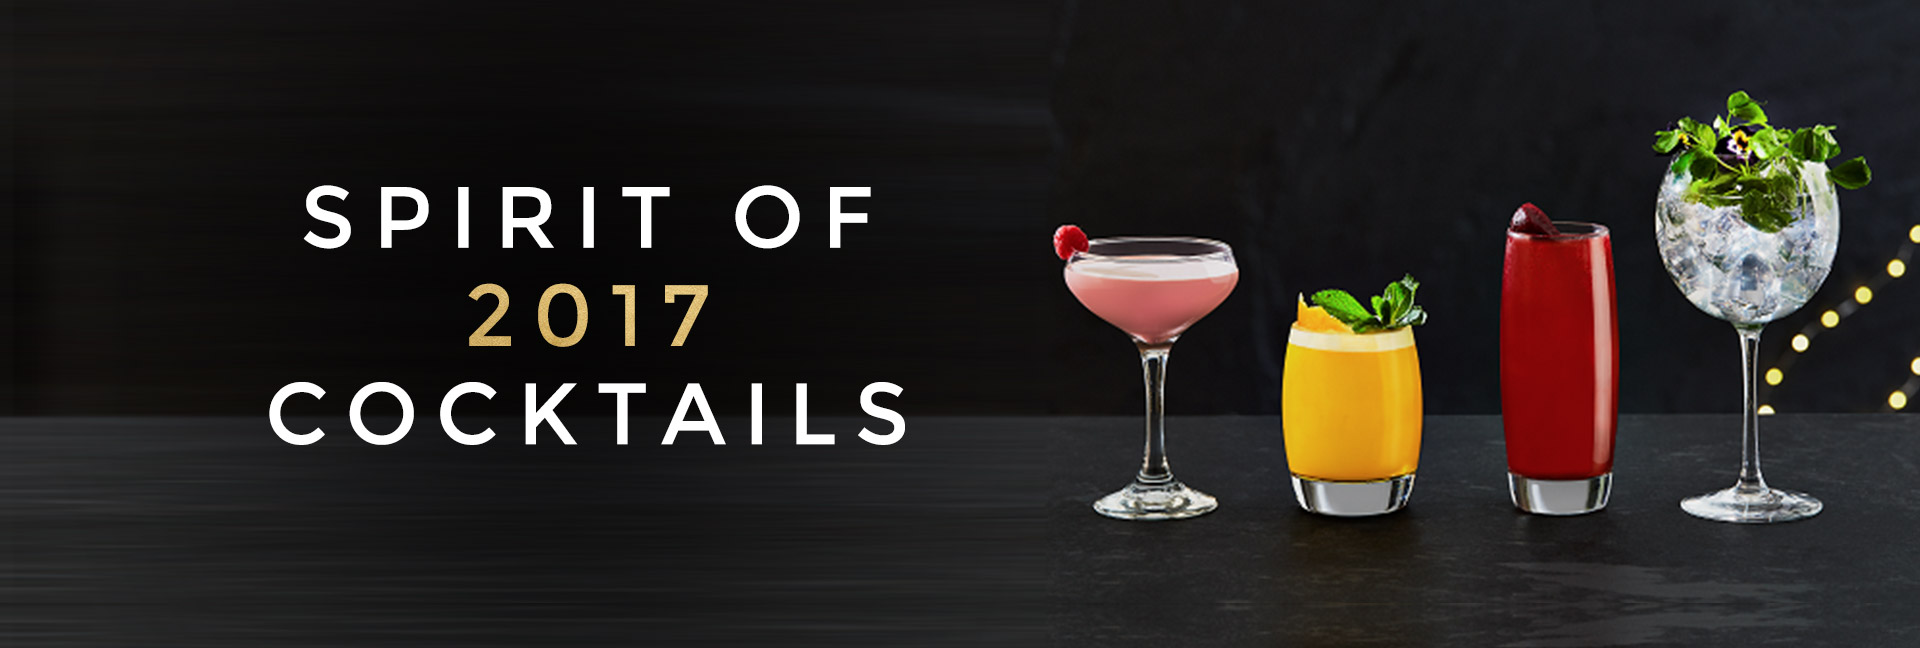 Spirit of 2017 cocktails at All Bar One Moorgate